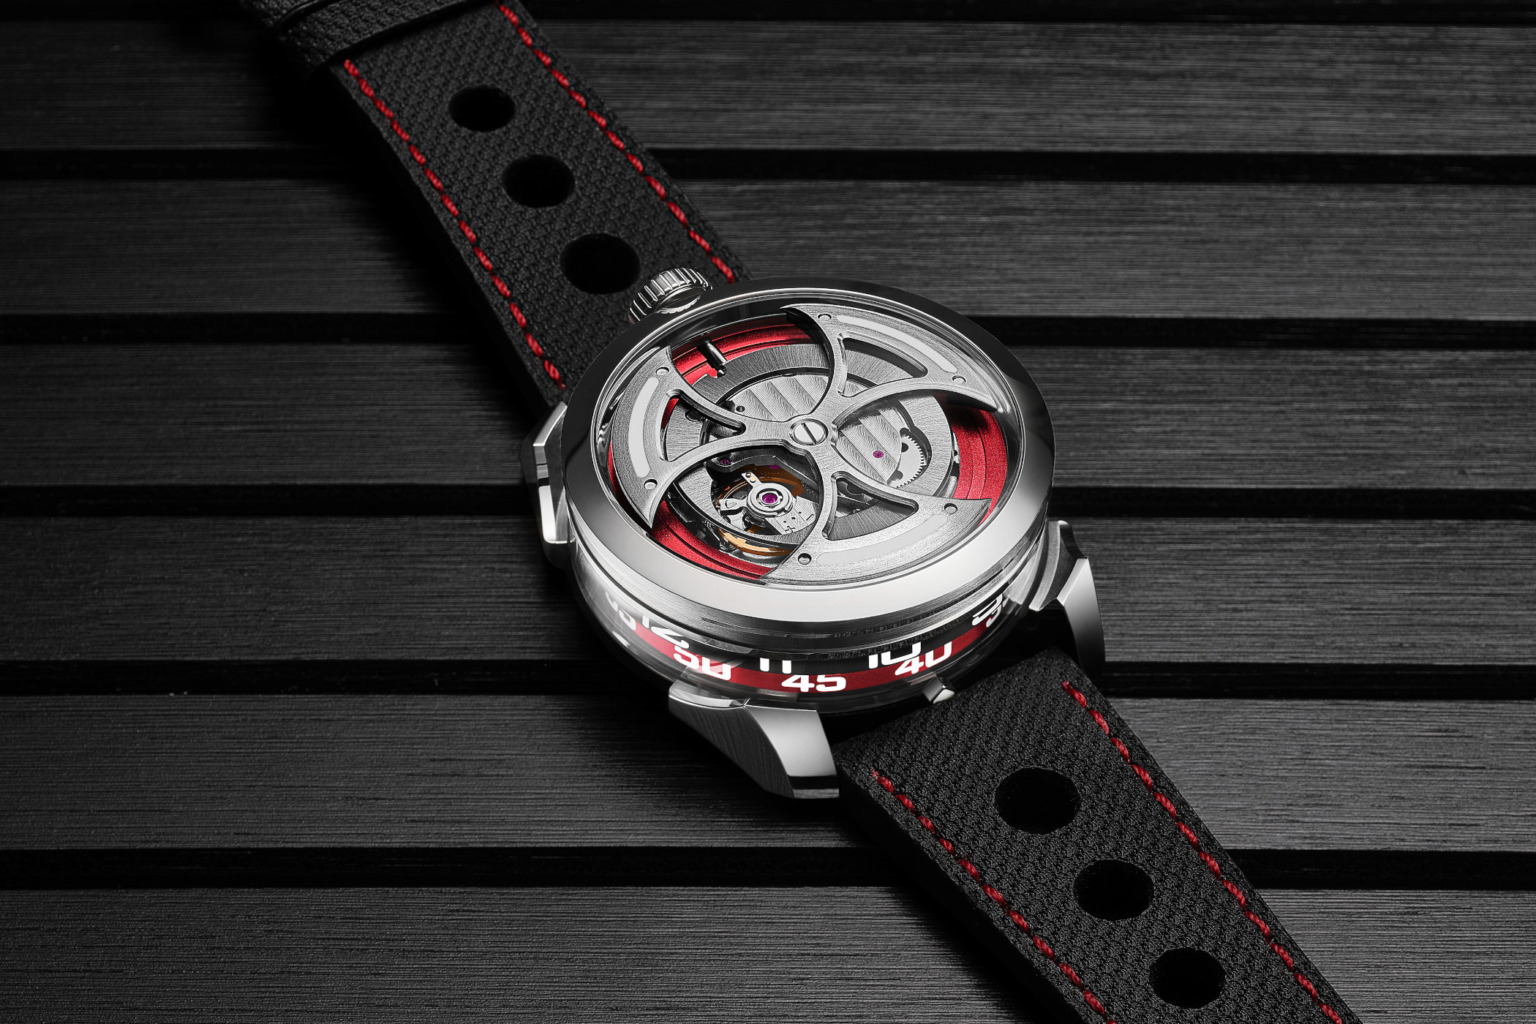 M.A.D. 1 Red watch 